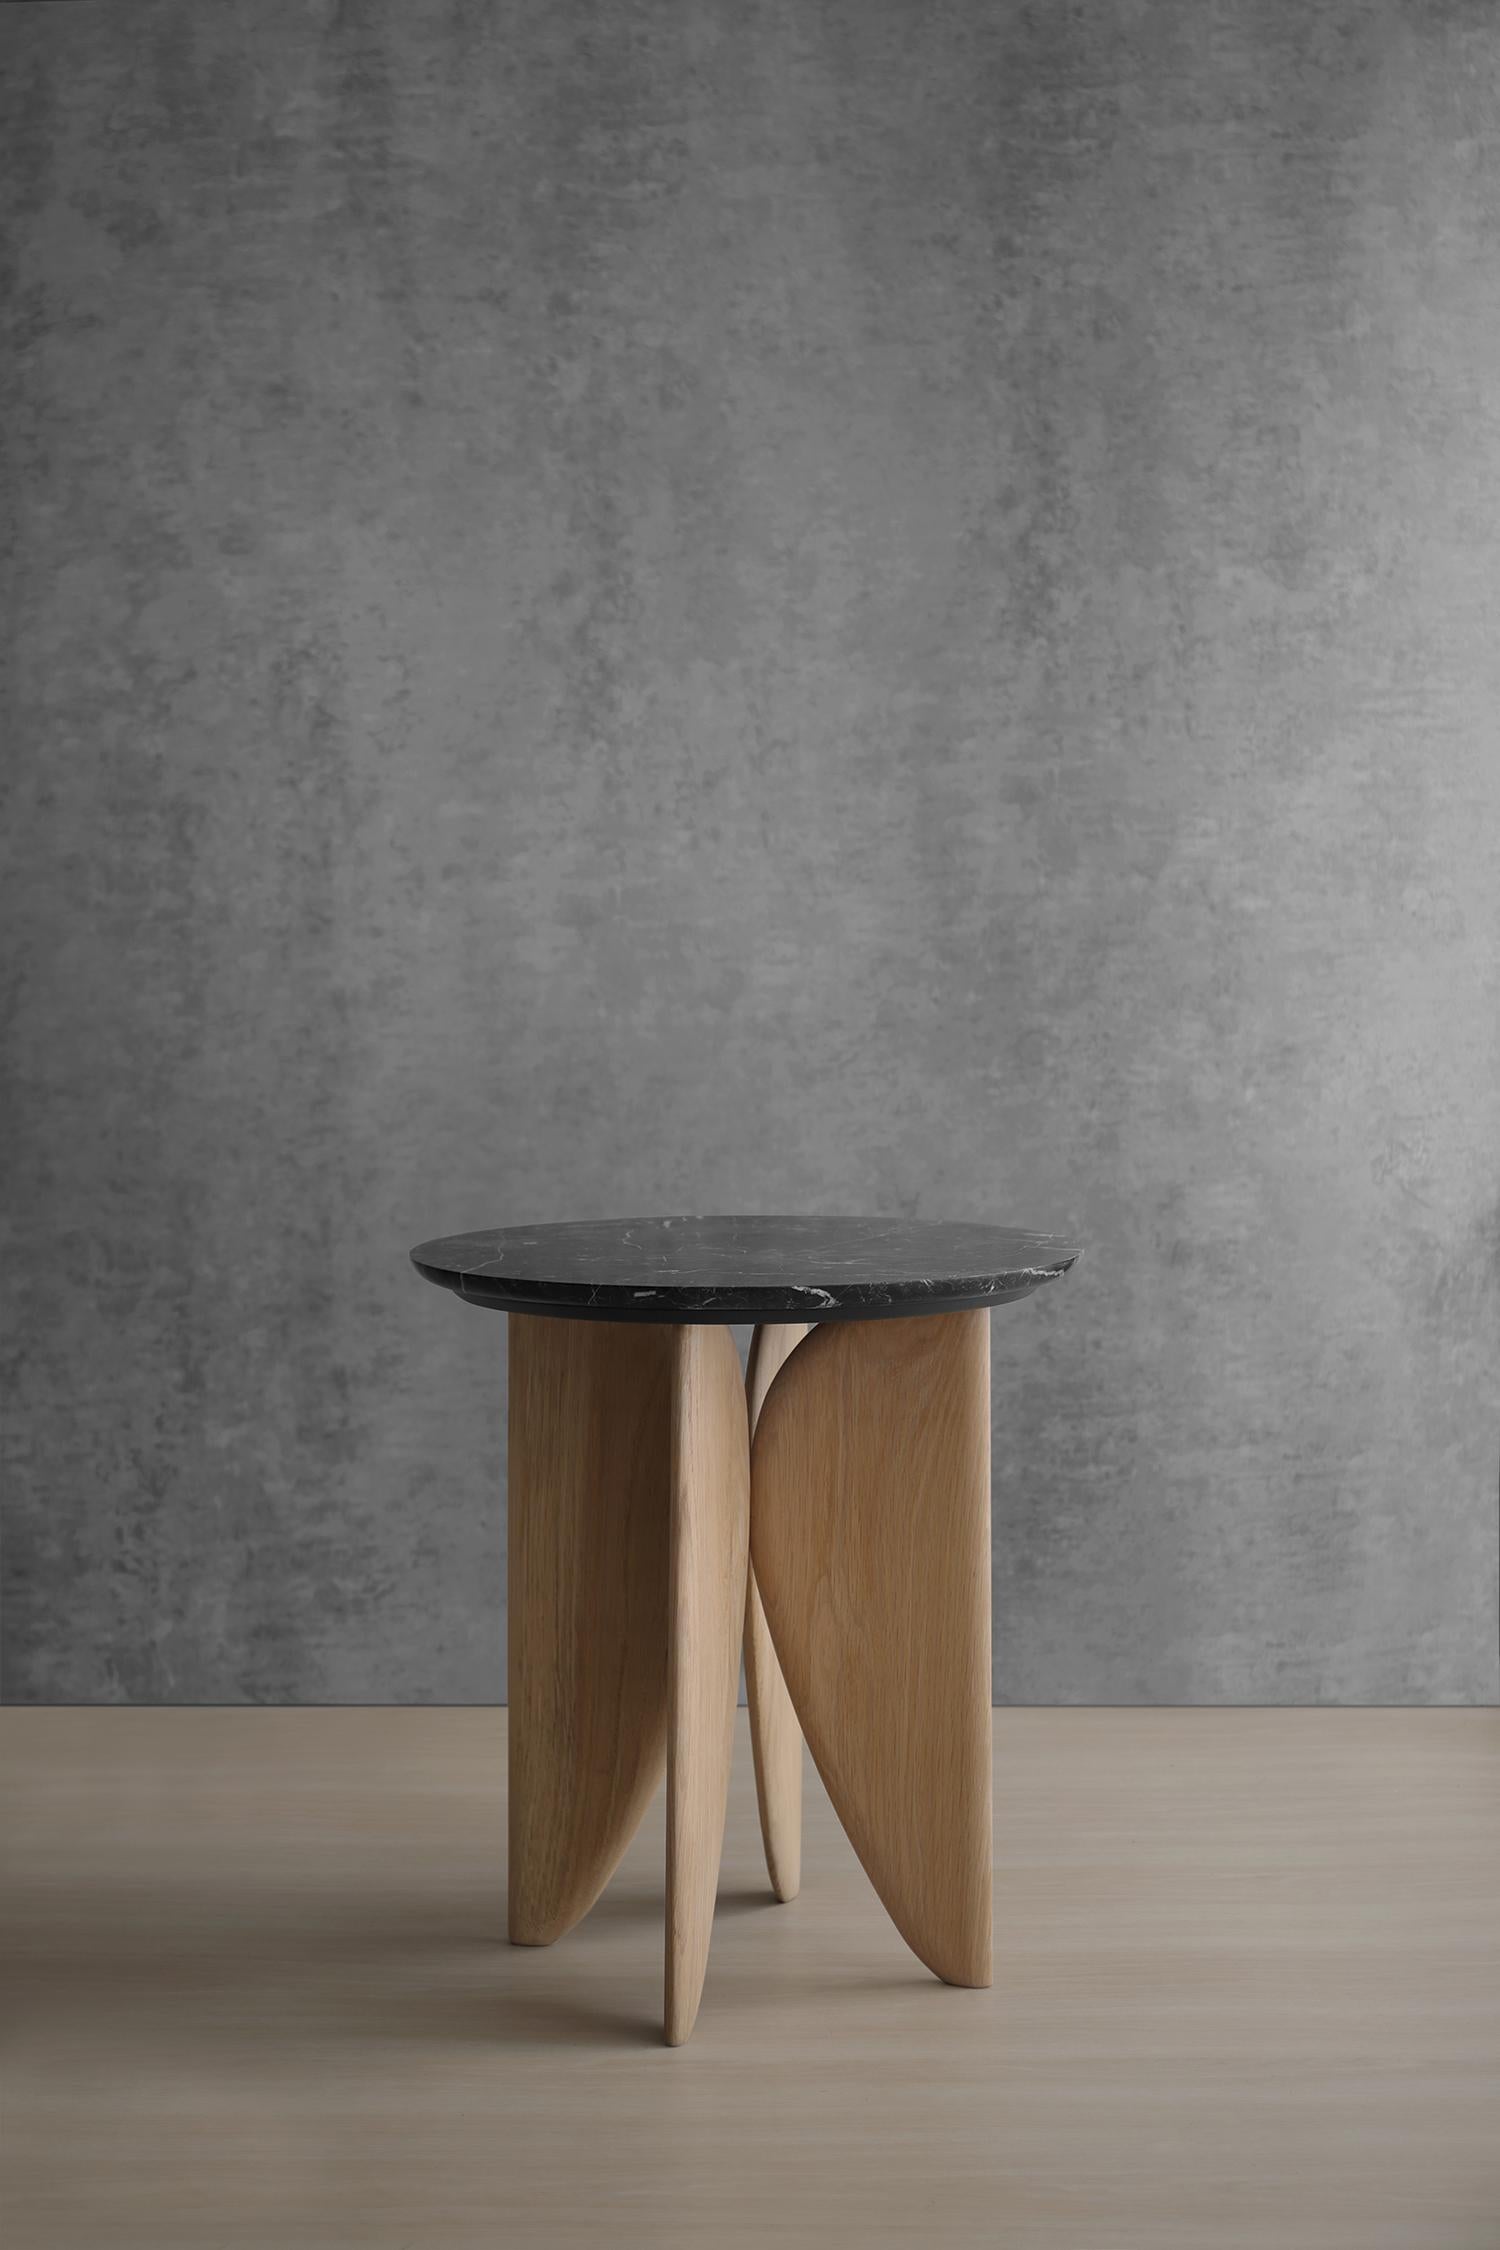 VI Sexta side table by Joel Escalona
Dimensions: D 50 x W 50 x H 55 cm
Materials: oak woo, Negro Monterrey marble.

Auxiliary table made of natural white oak and Negro Monterrey marble.

Joel Escalona
He was born in Mexico City and studied